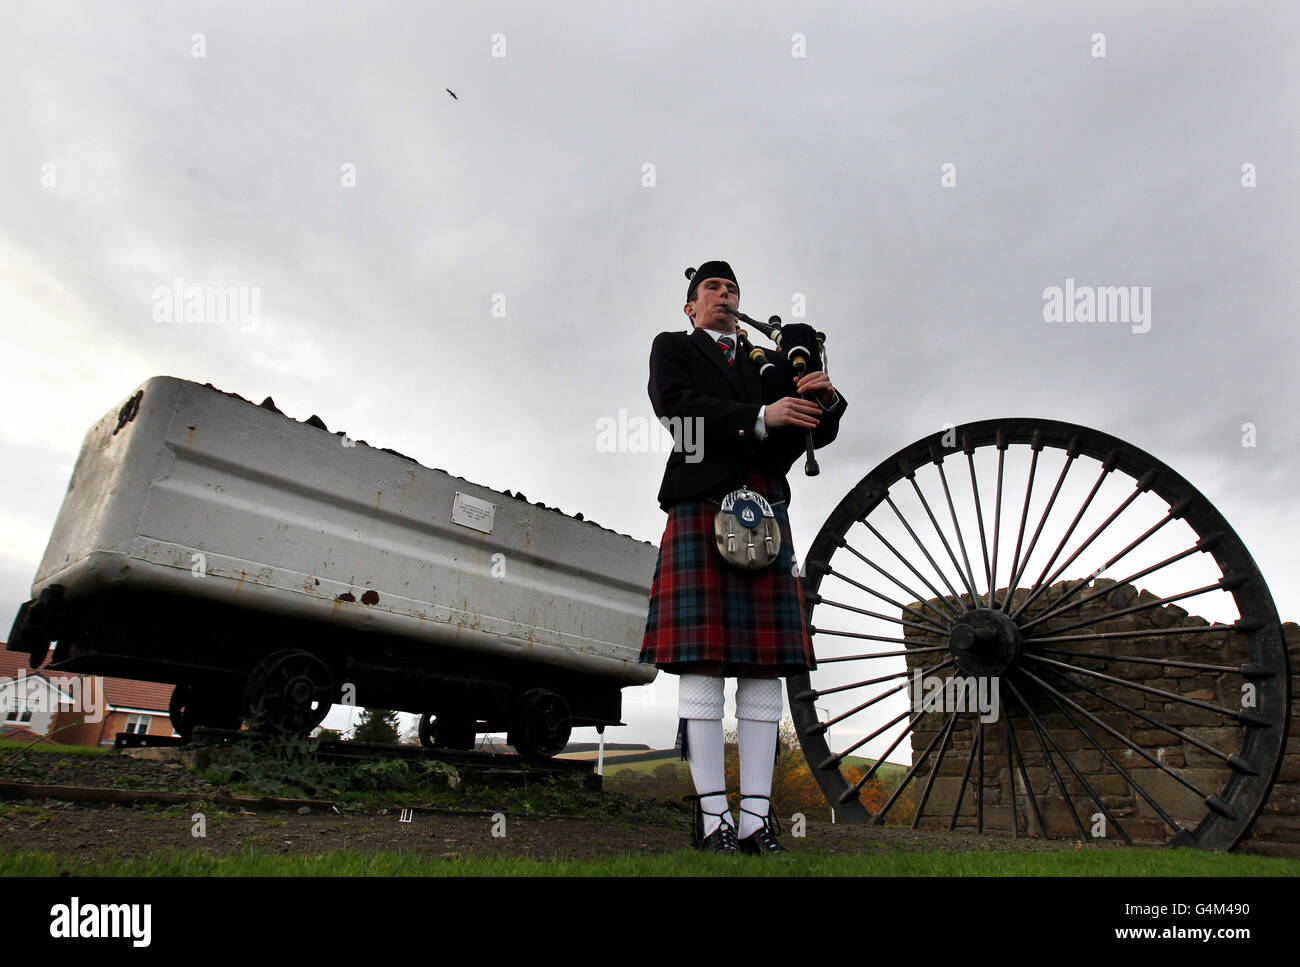 Walter Glendinning from Fife Police Pipe Band plays at the site of the Bowhill Collieries marking the 80th anniversary of the Scottish mining disaster where 10 men lost their lives. Stock Photo